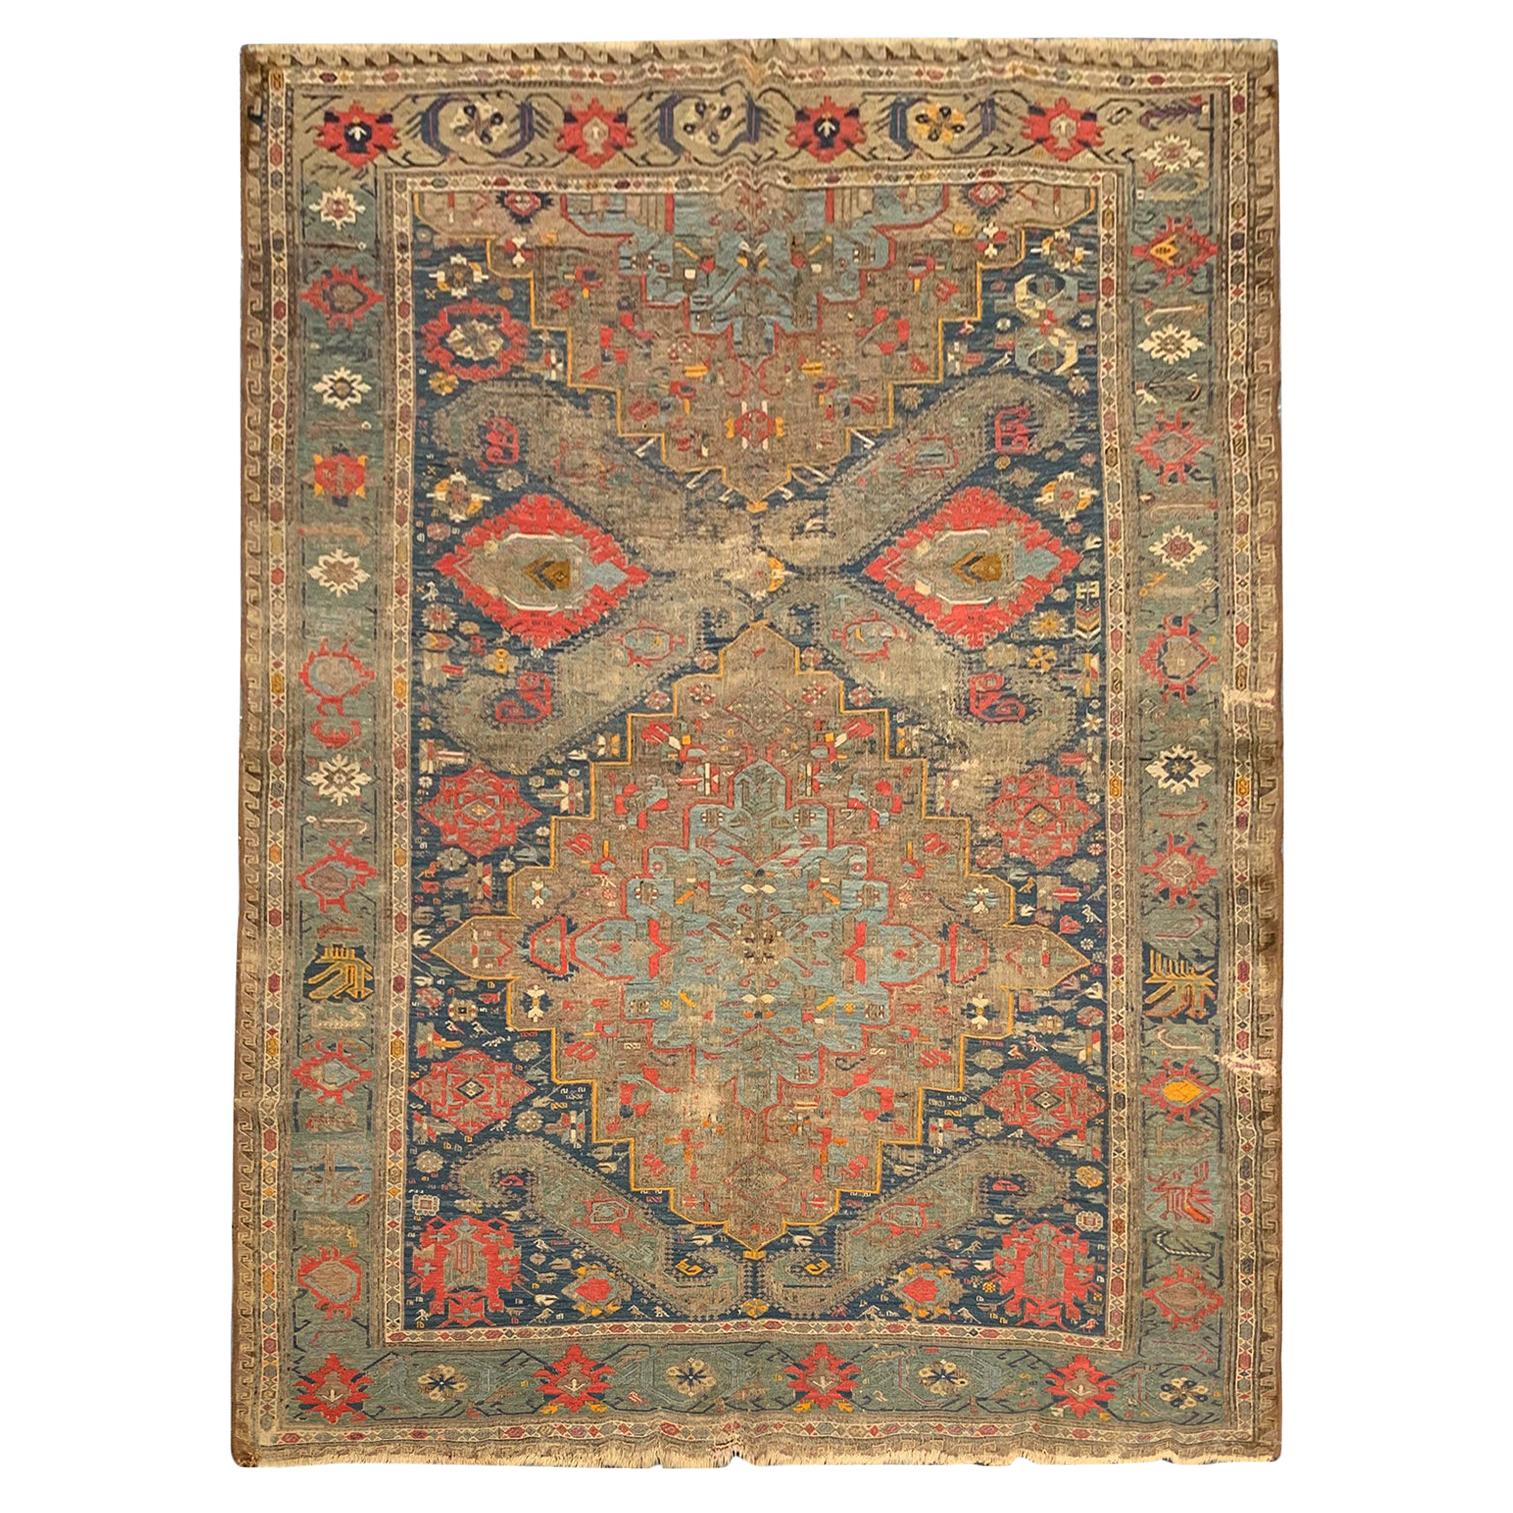 Traditional Antique Rugs Oriental Wool Carpet Home Decor Area